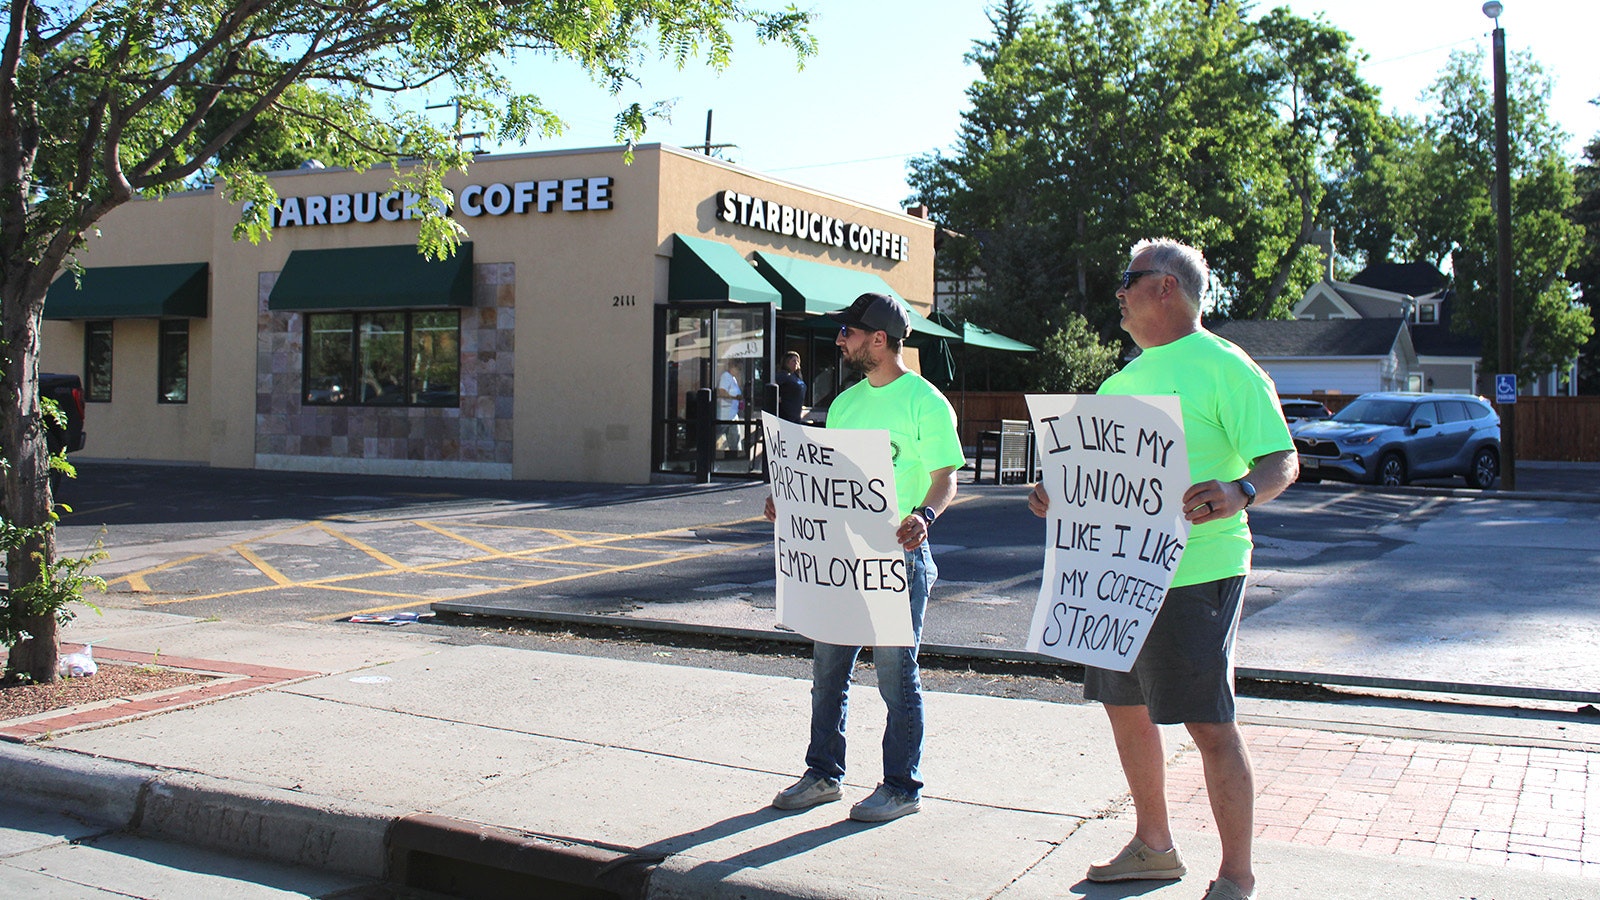 Austin Vye, a member of the International Brotherhood of Electrical Workers Local 415, and his father, Mark, supported Sunday's Starbucks strike.